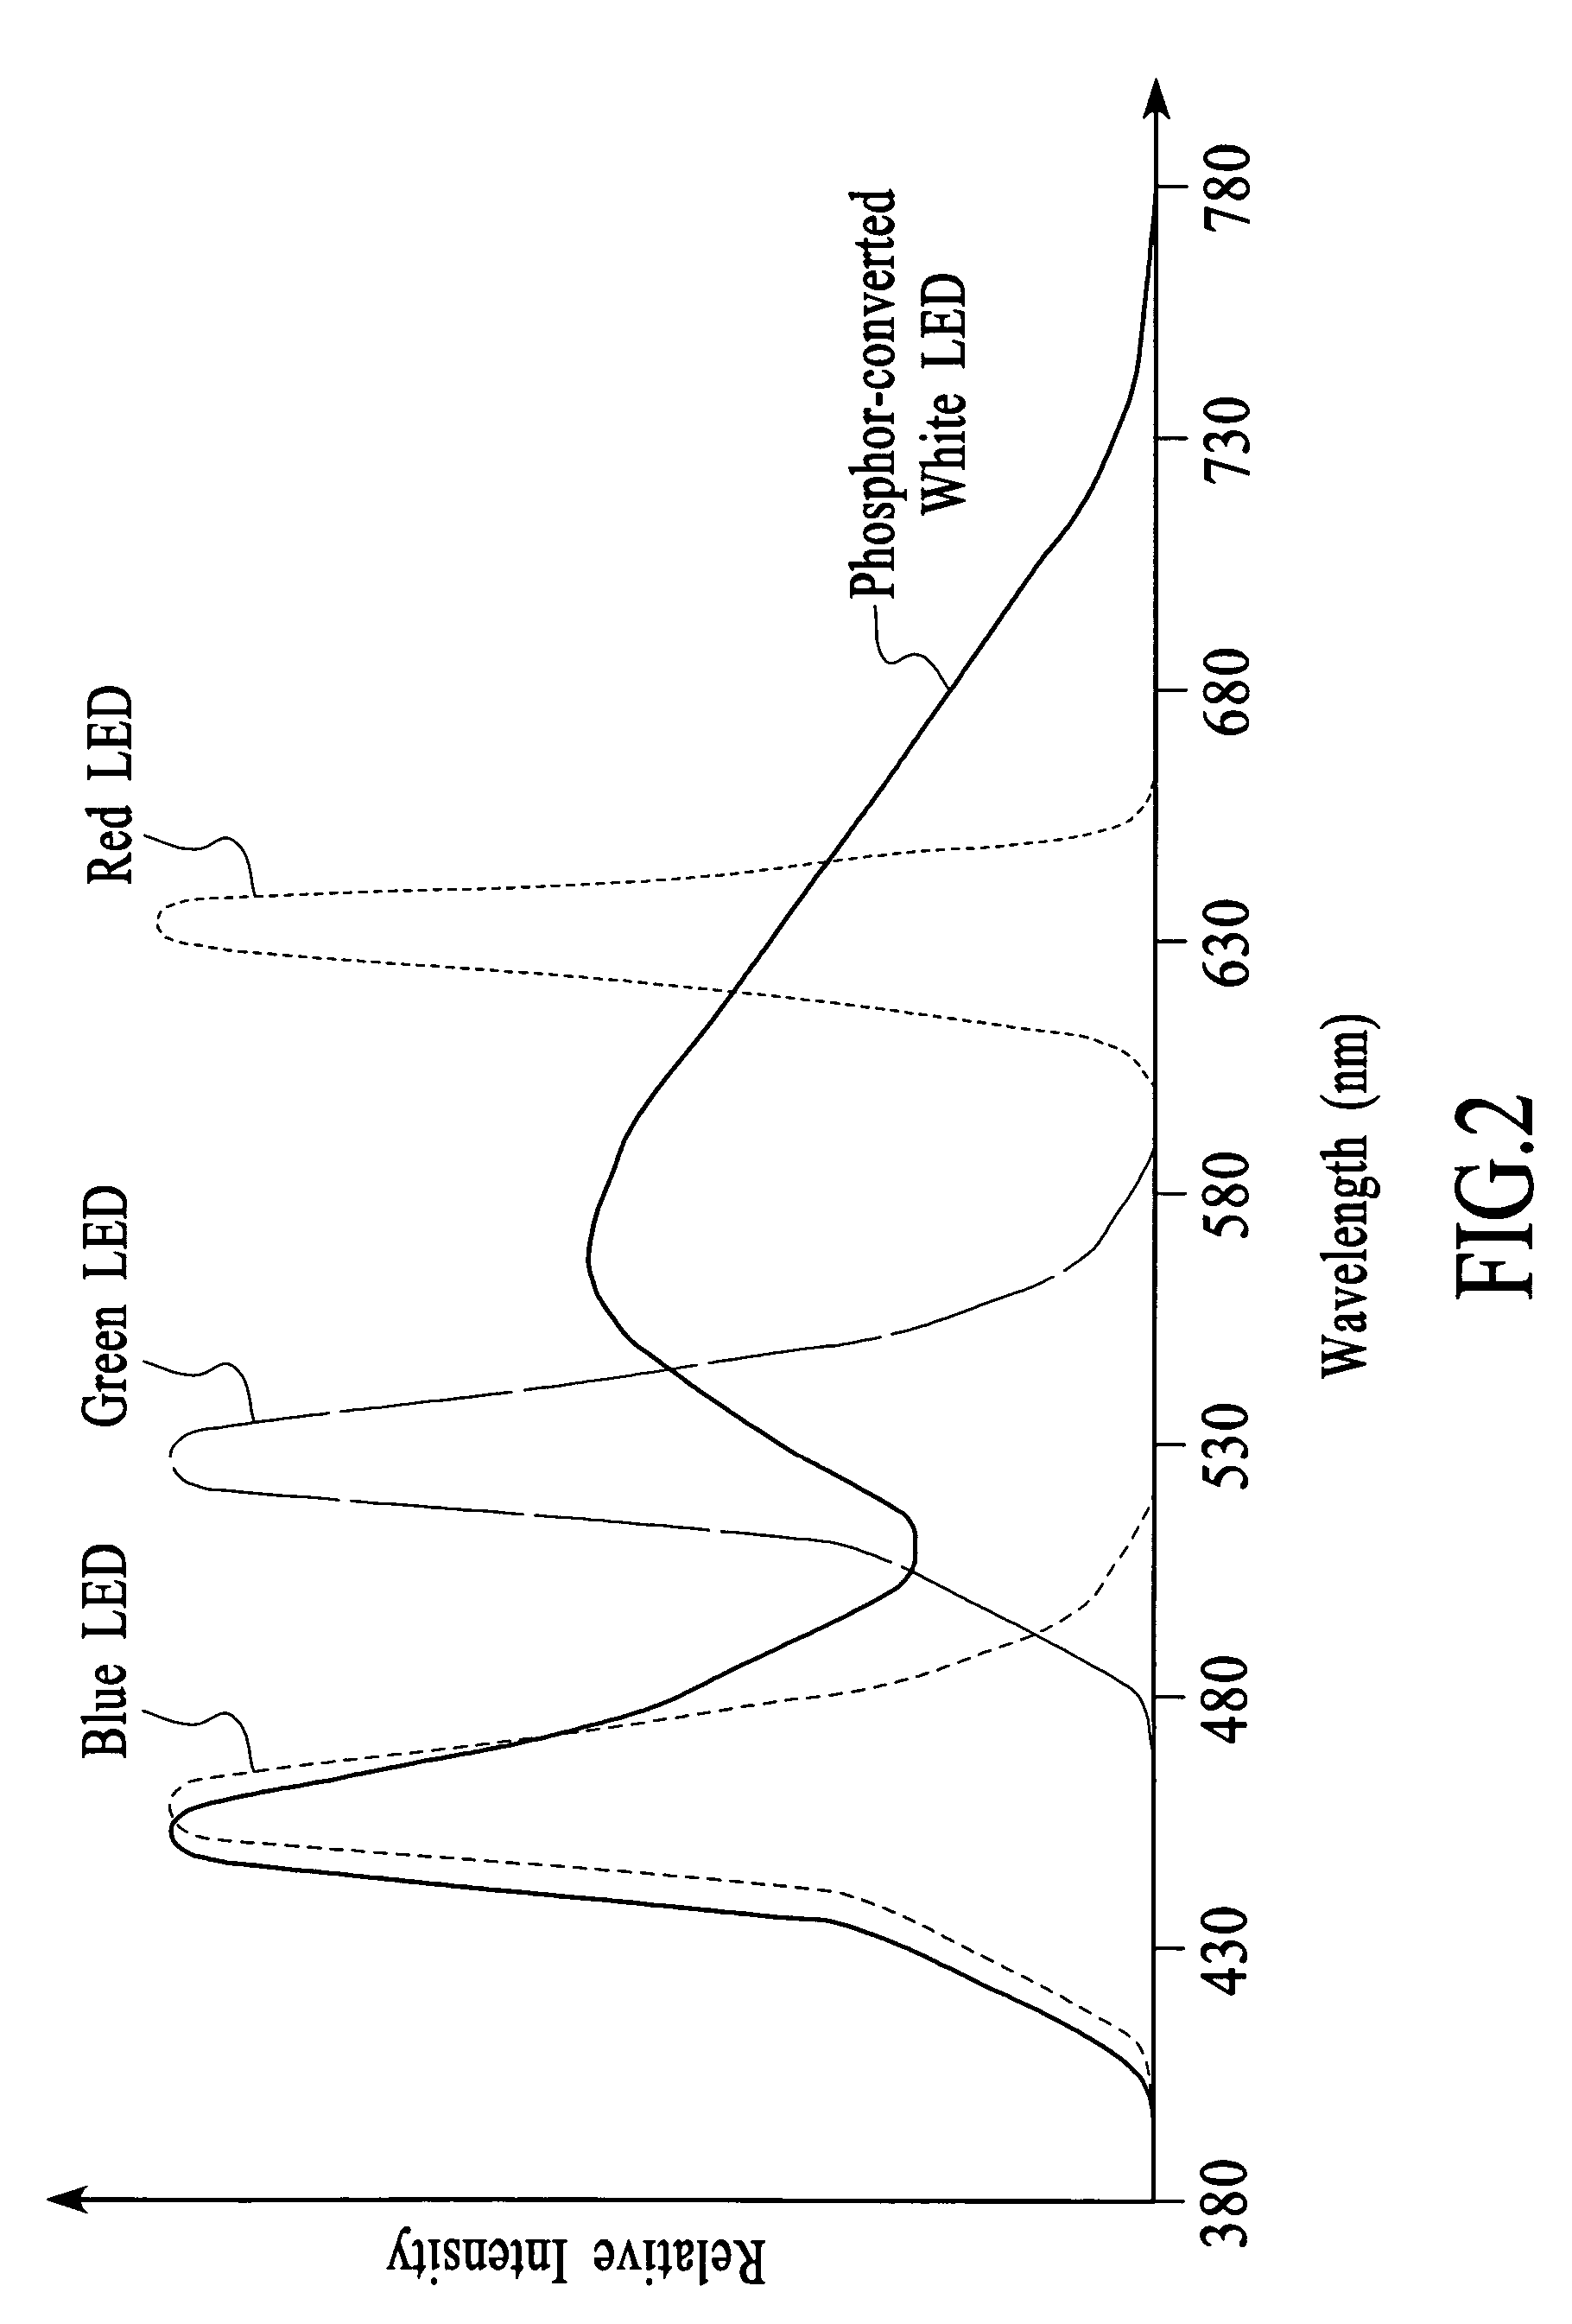 System and method for producing white light using a combination of phosphor-converted white LEDs and non-phosphor-converted color LEDs